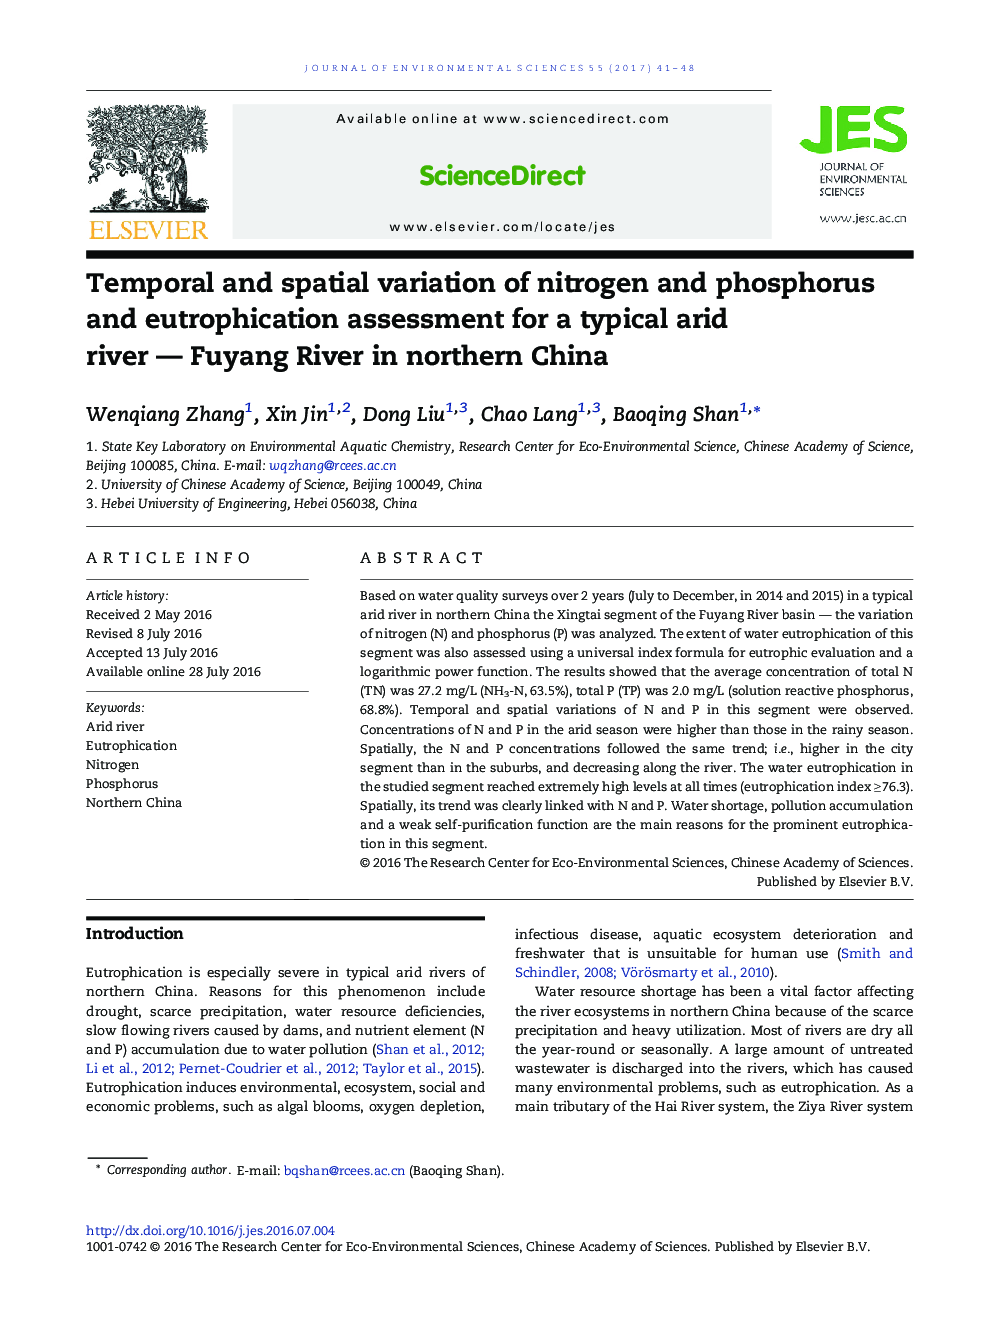 Temporal and spatial variation of nitrogen and phosphorus and eutrophication assessment for a typical arid river - Fuyang River in northern China